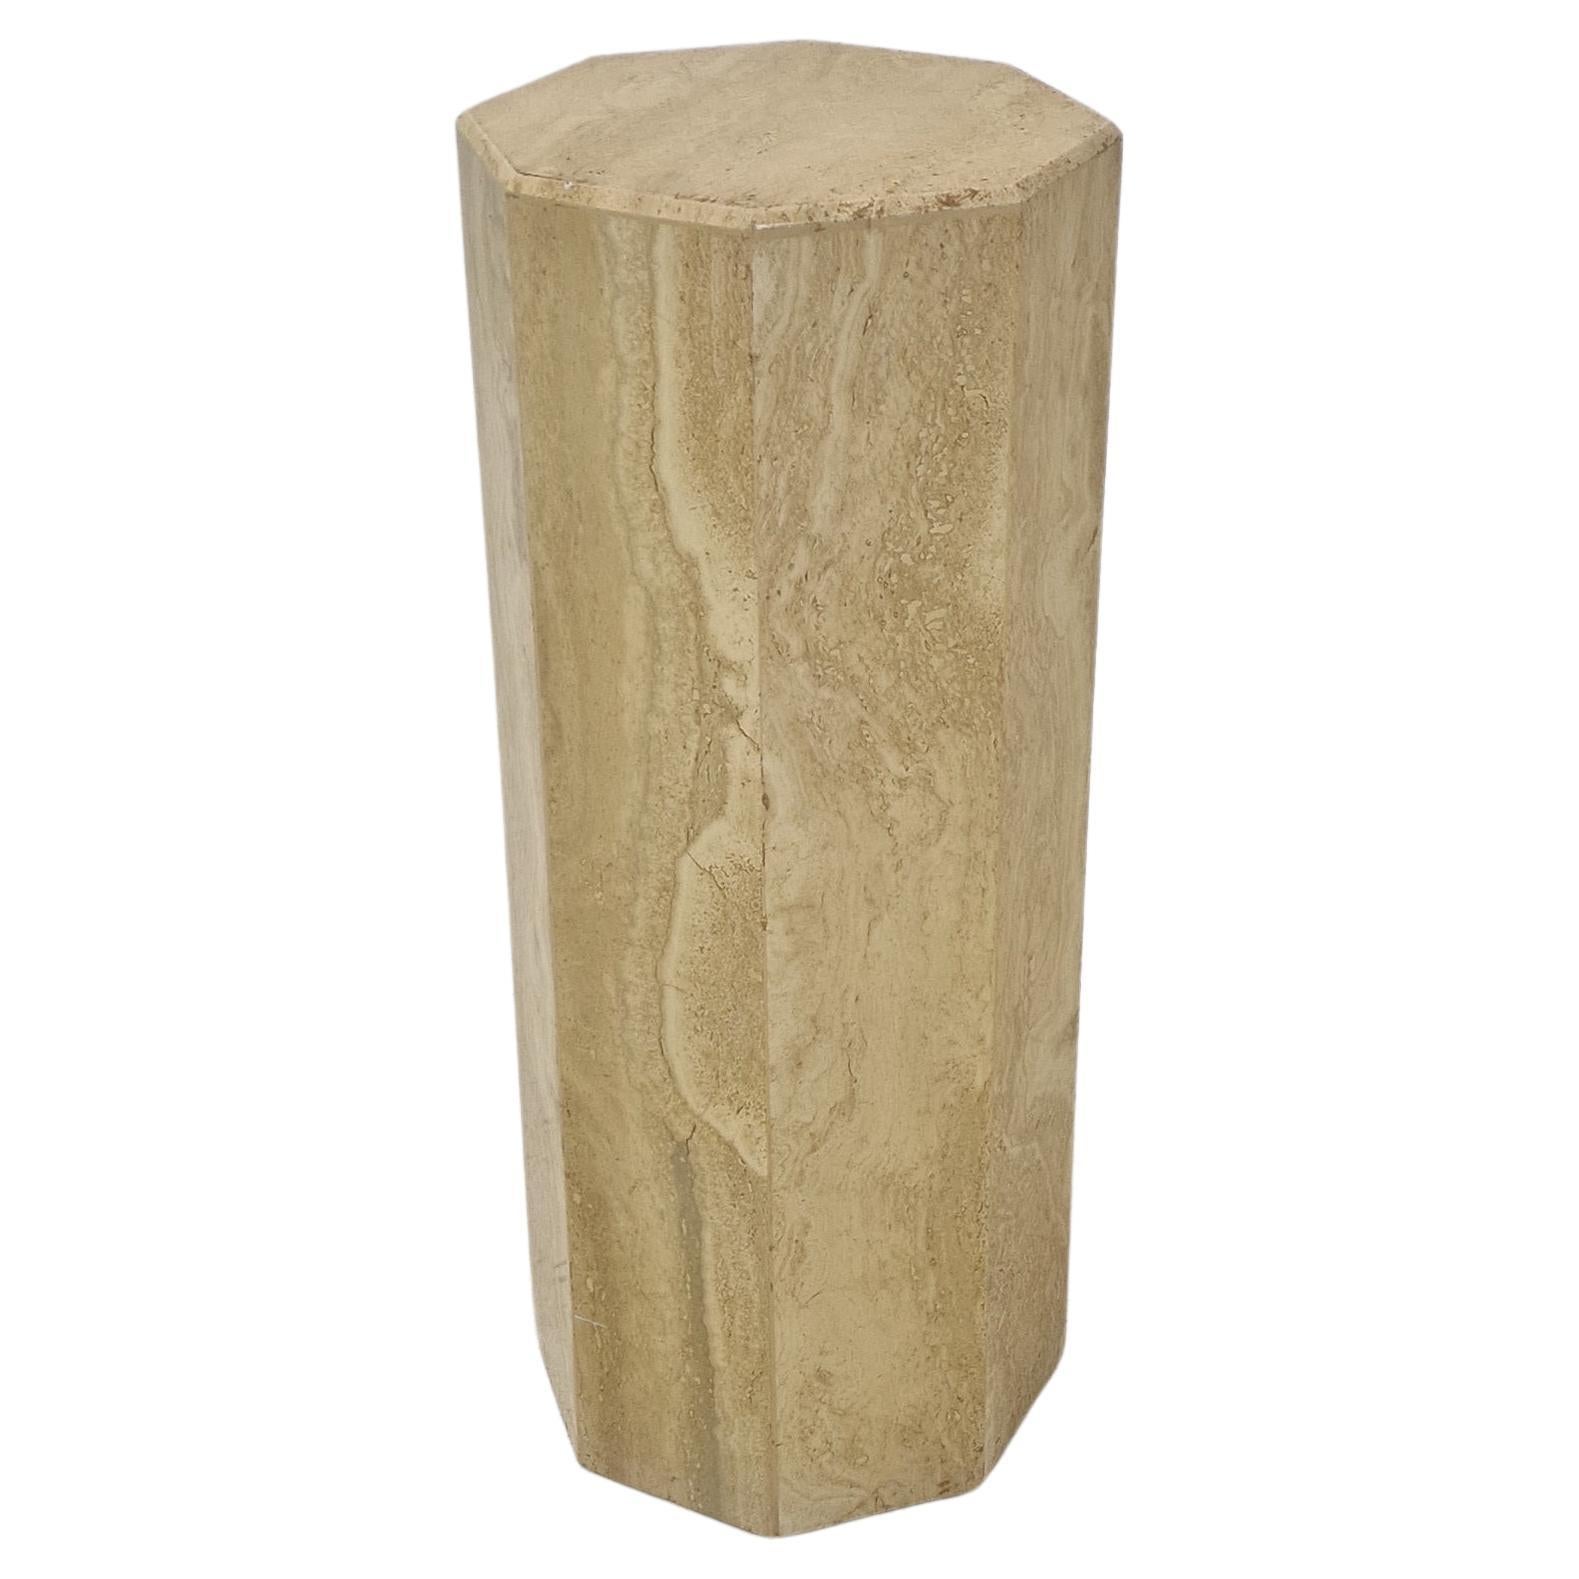 Italian Travertine Side Table or Pedestal, 1980's For Sale